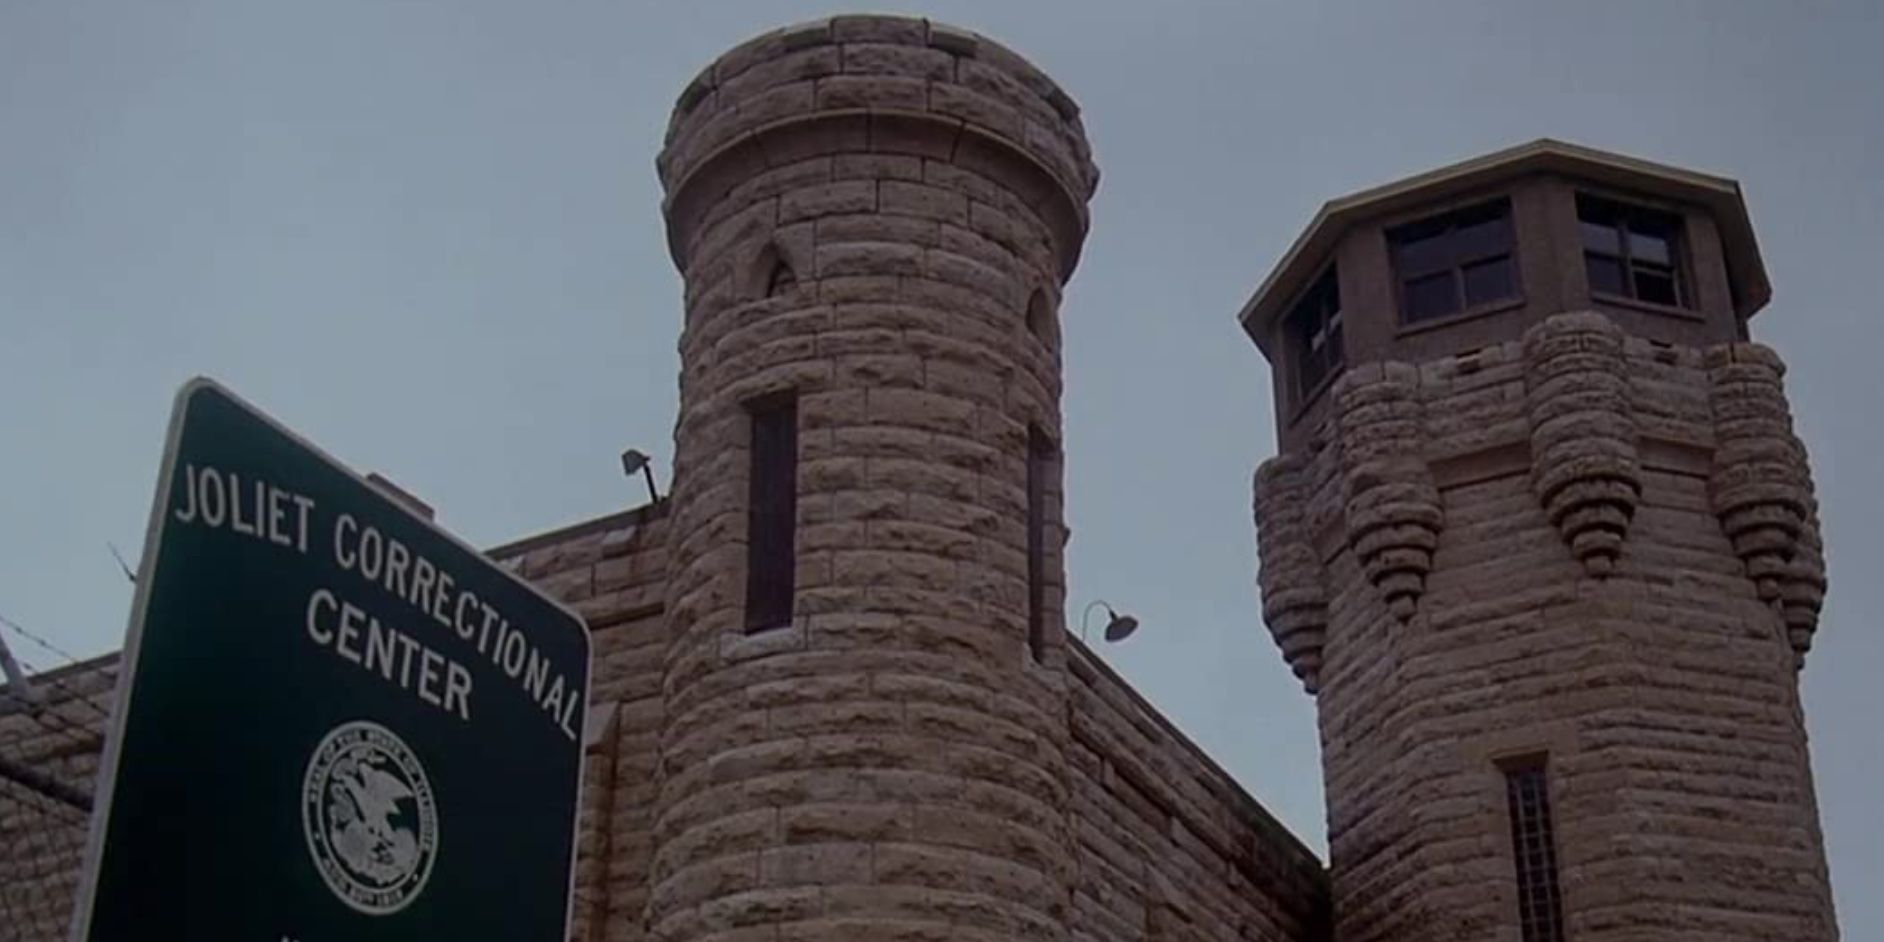 Joliet Correctional Center in The Blues Brothers